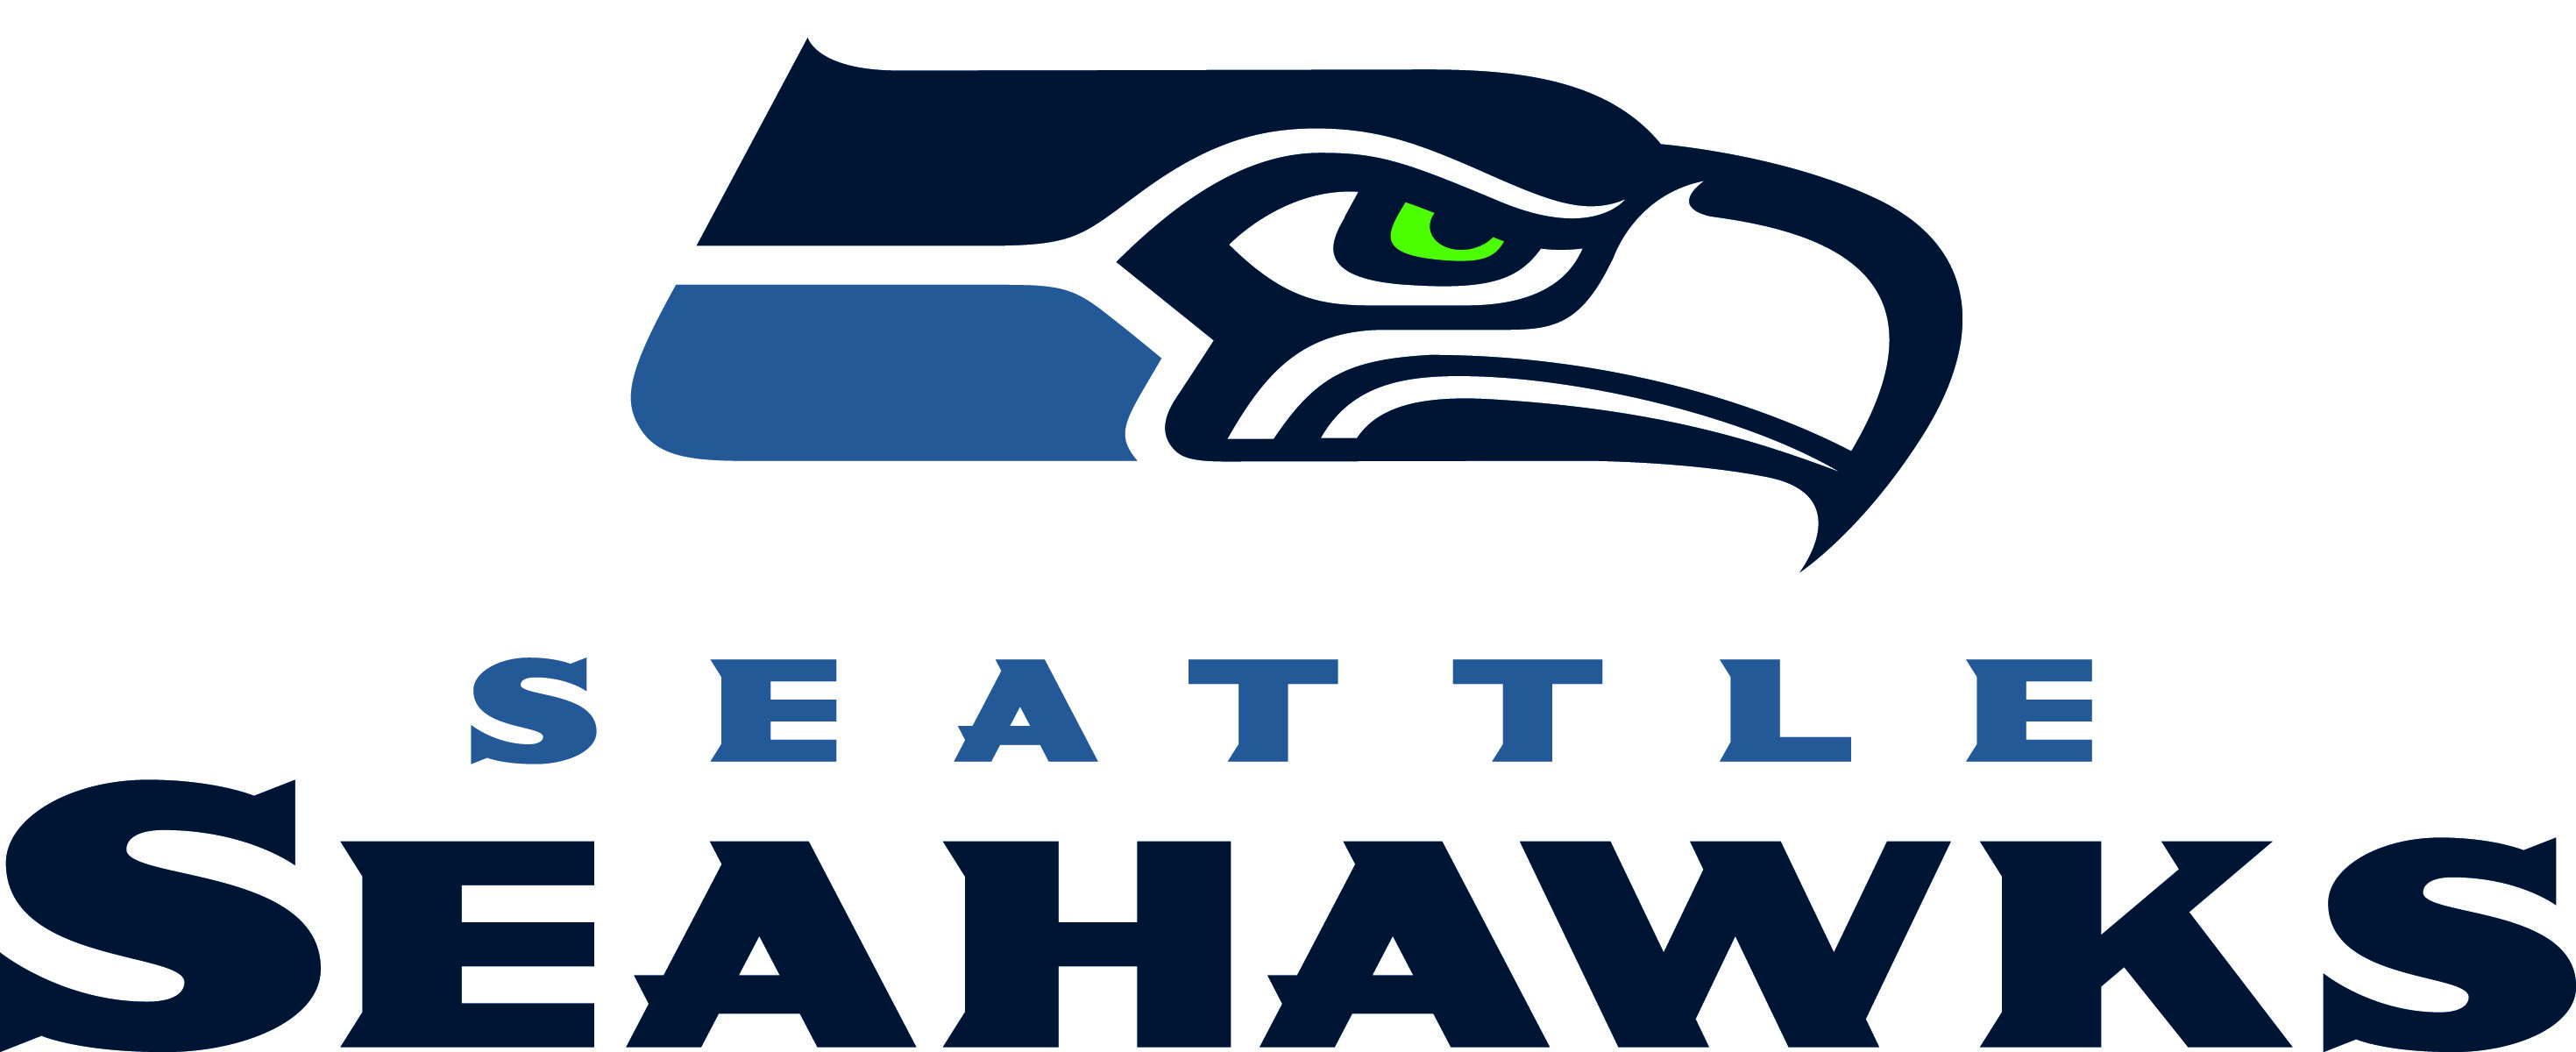 Fly With The Seahawks   The 45th Annual Big Event